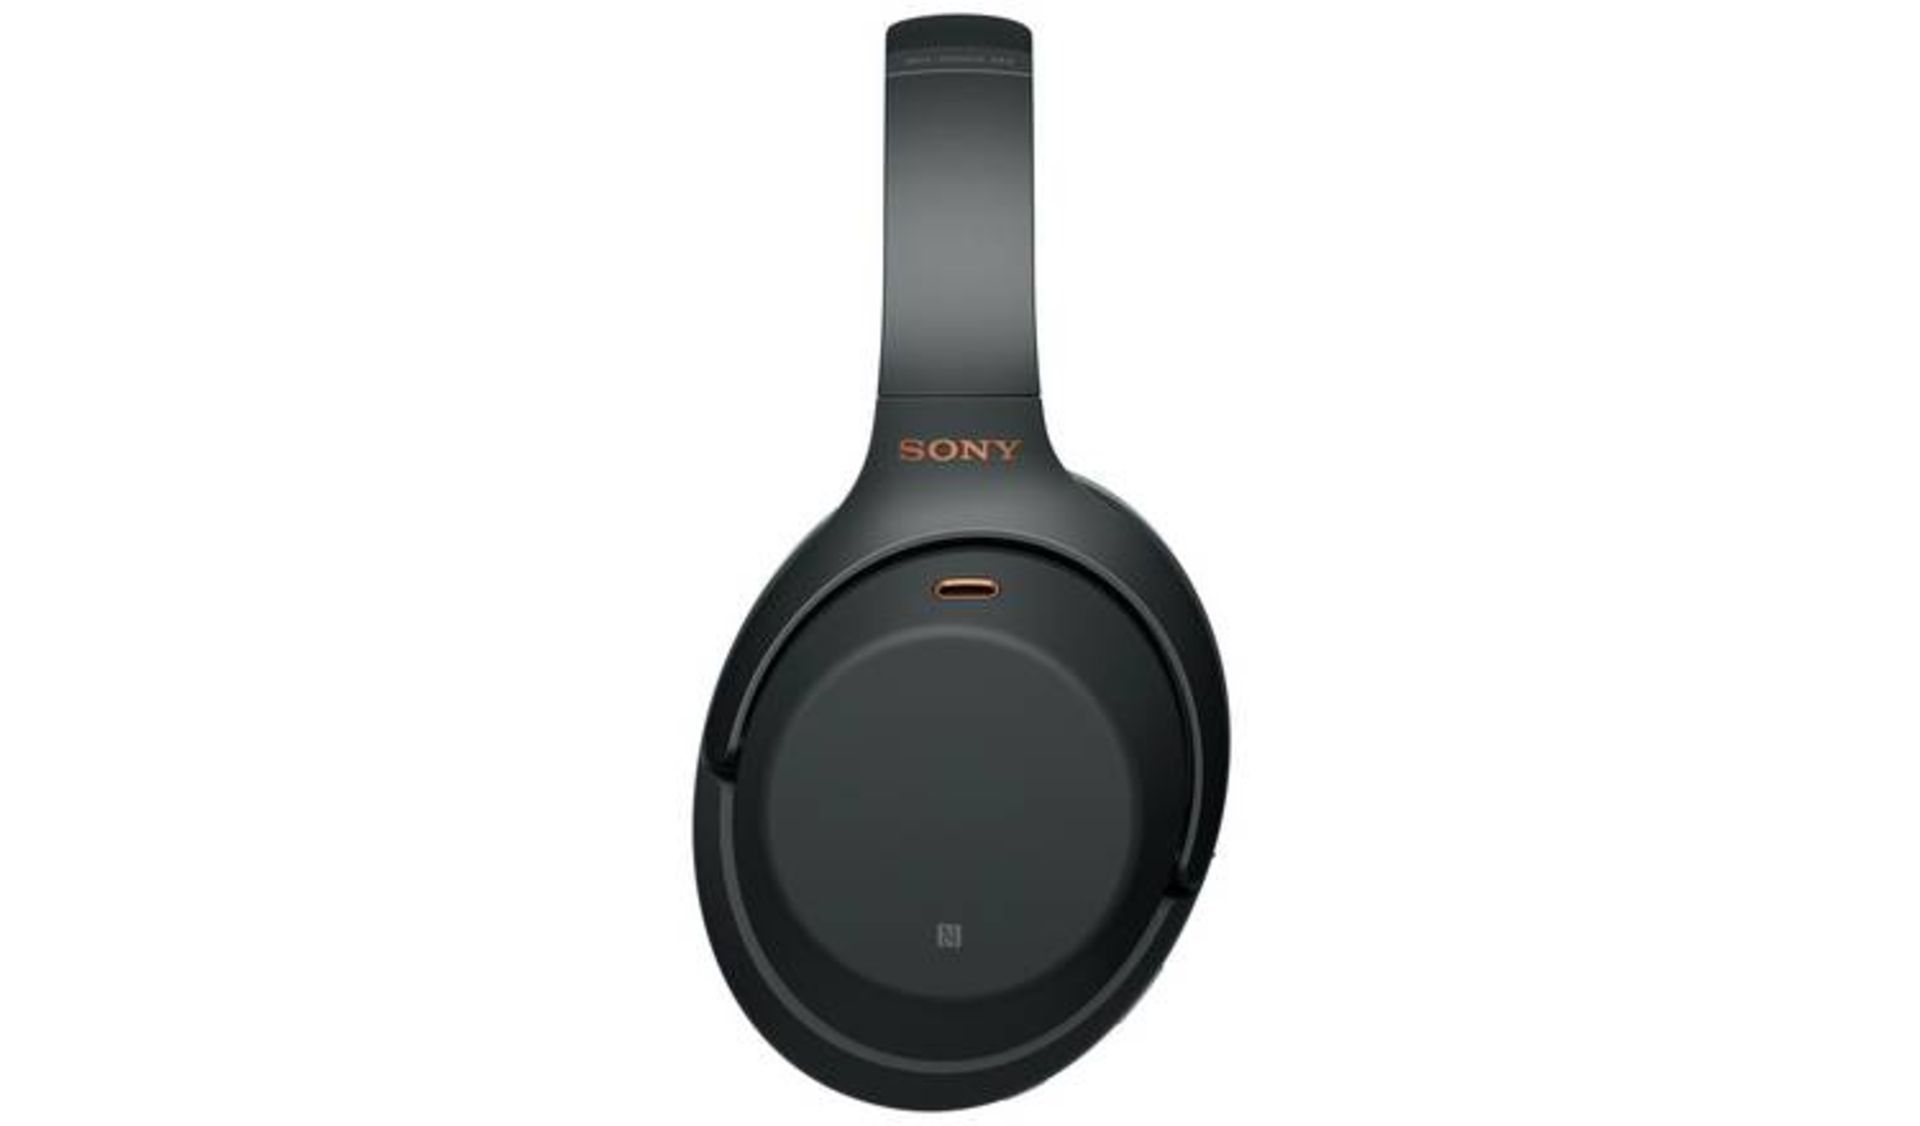 AS NEW CONDITION SONY WH-1000XM3 ON-EAR WIRELESS HEADPHONES - BLACK *NO VAT* - Image 7 of 9